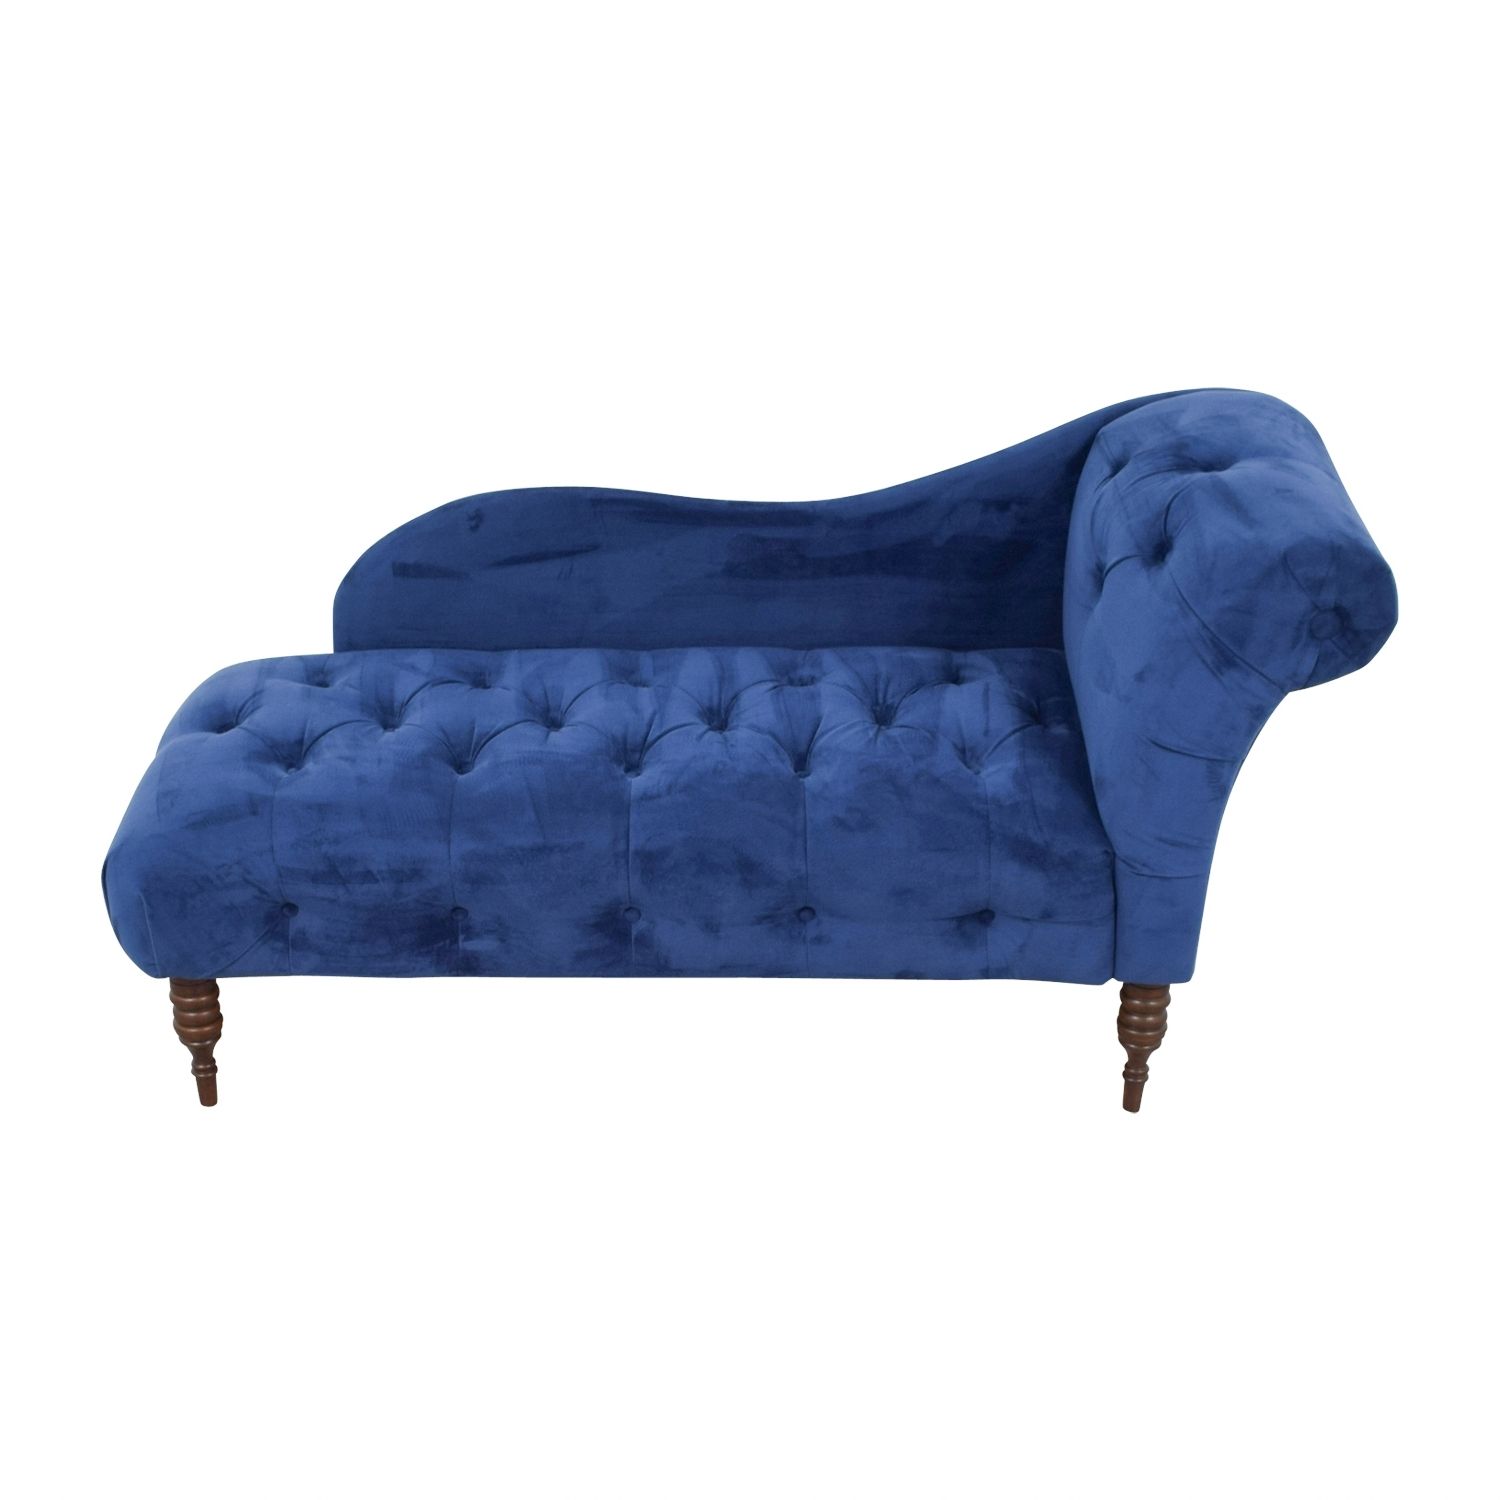 [%39% Off – One Kings Lane One Kings Lane Abbyson Francis Tufted Regarding 2018 Blue Chaises|blue Chaises Regarding Well Known 39% Off – One Kings Lane One Kings Lane Abbyson Francis Tufted|most Popular Blue Chaises Pertaining To 39% Off – One Kings Lane One Kings Lane Abbyson Francis Tufted|famous 39% Off – One Kings Lane One Kings Lane Abbyson Francis Tufted Regarding Blue Chaises%] (View 15 of 15)